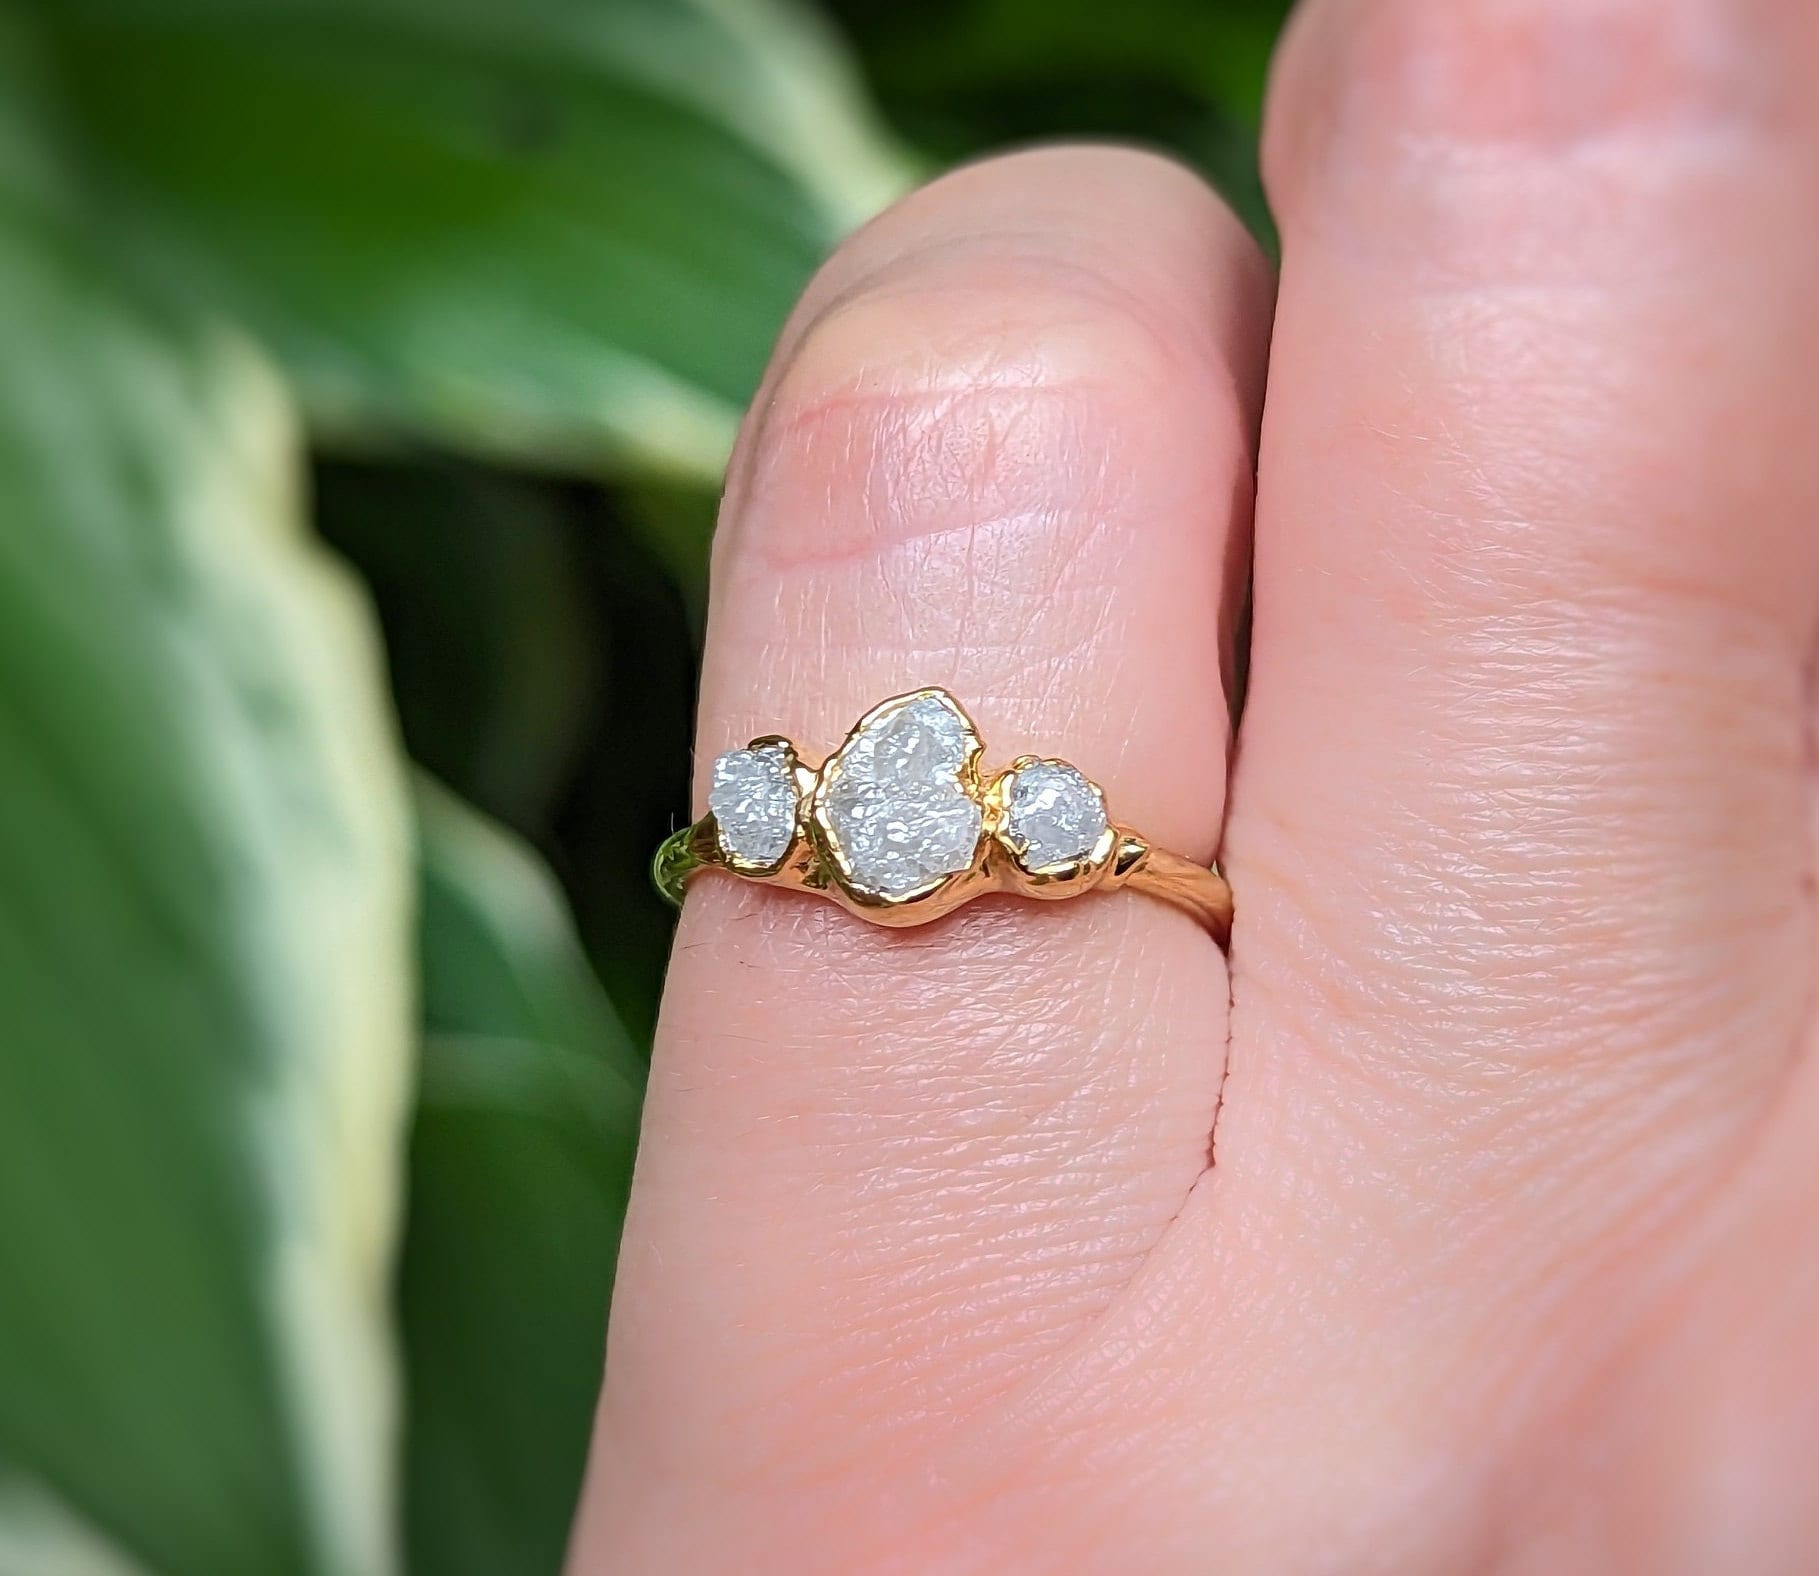 Raw uncut 3-diamond engagement ring in unique 18k Gold setting